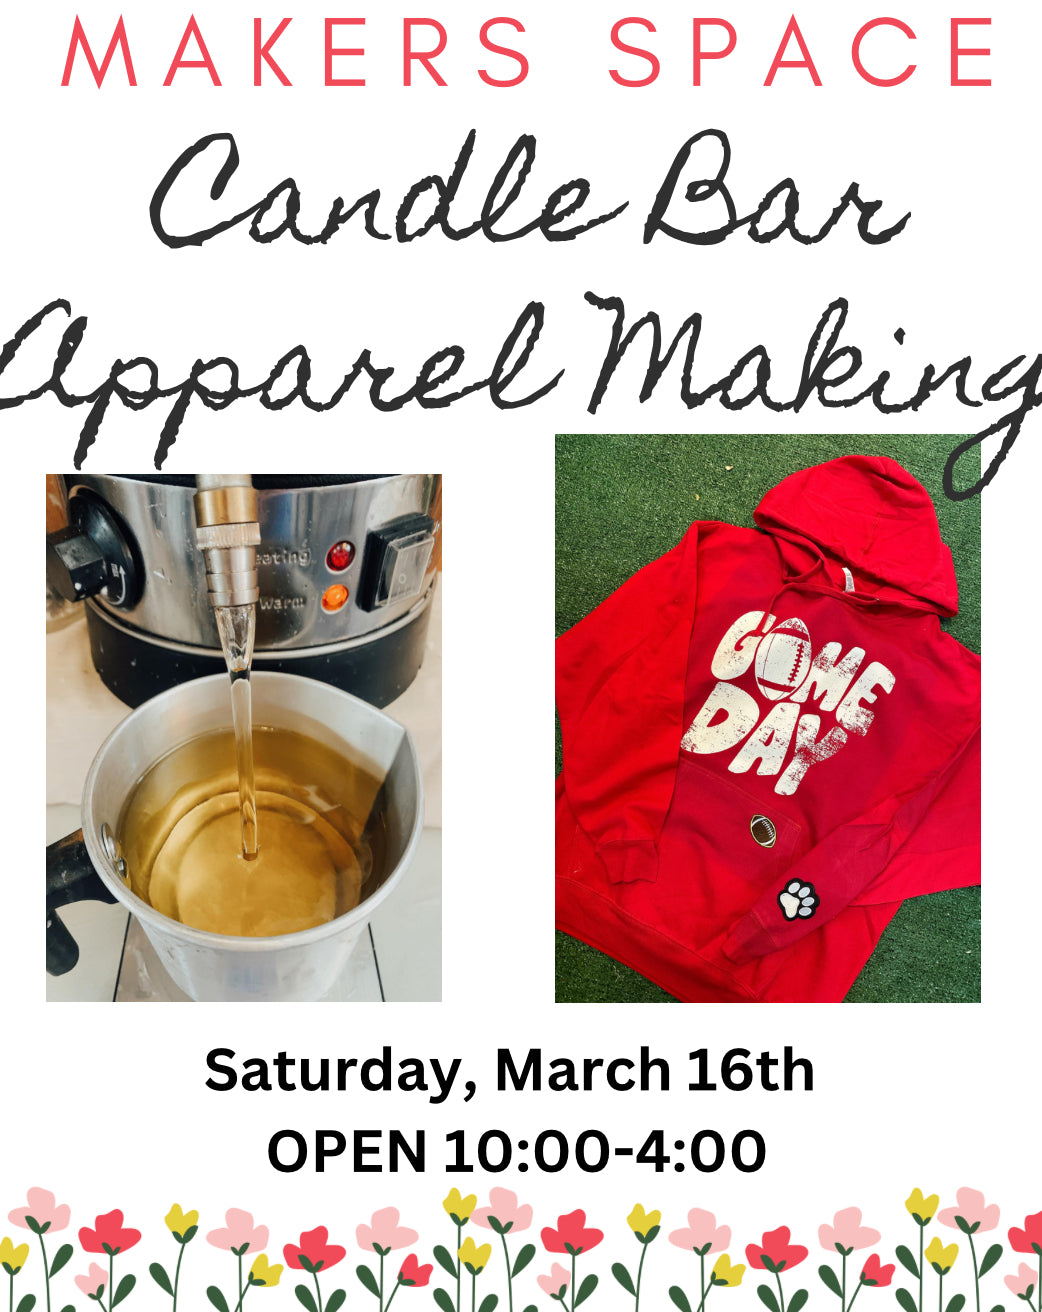 Makers Space (Candle Bar &/or apparel making) on Saturday 3/16